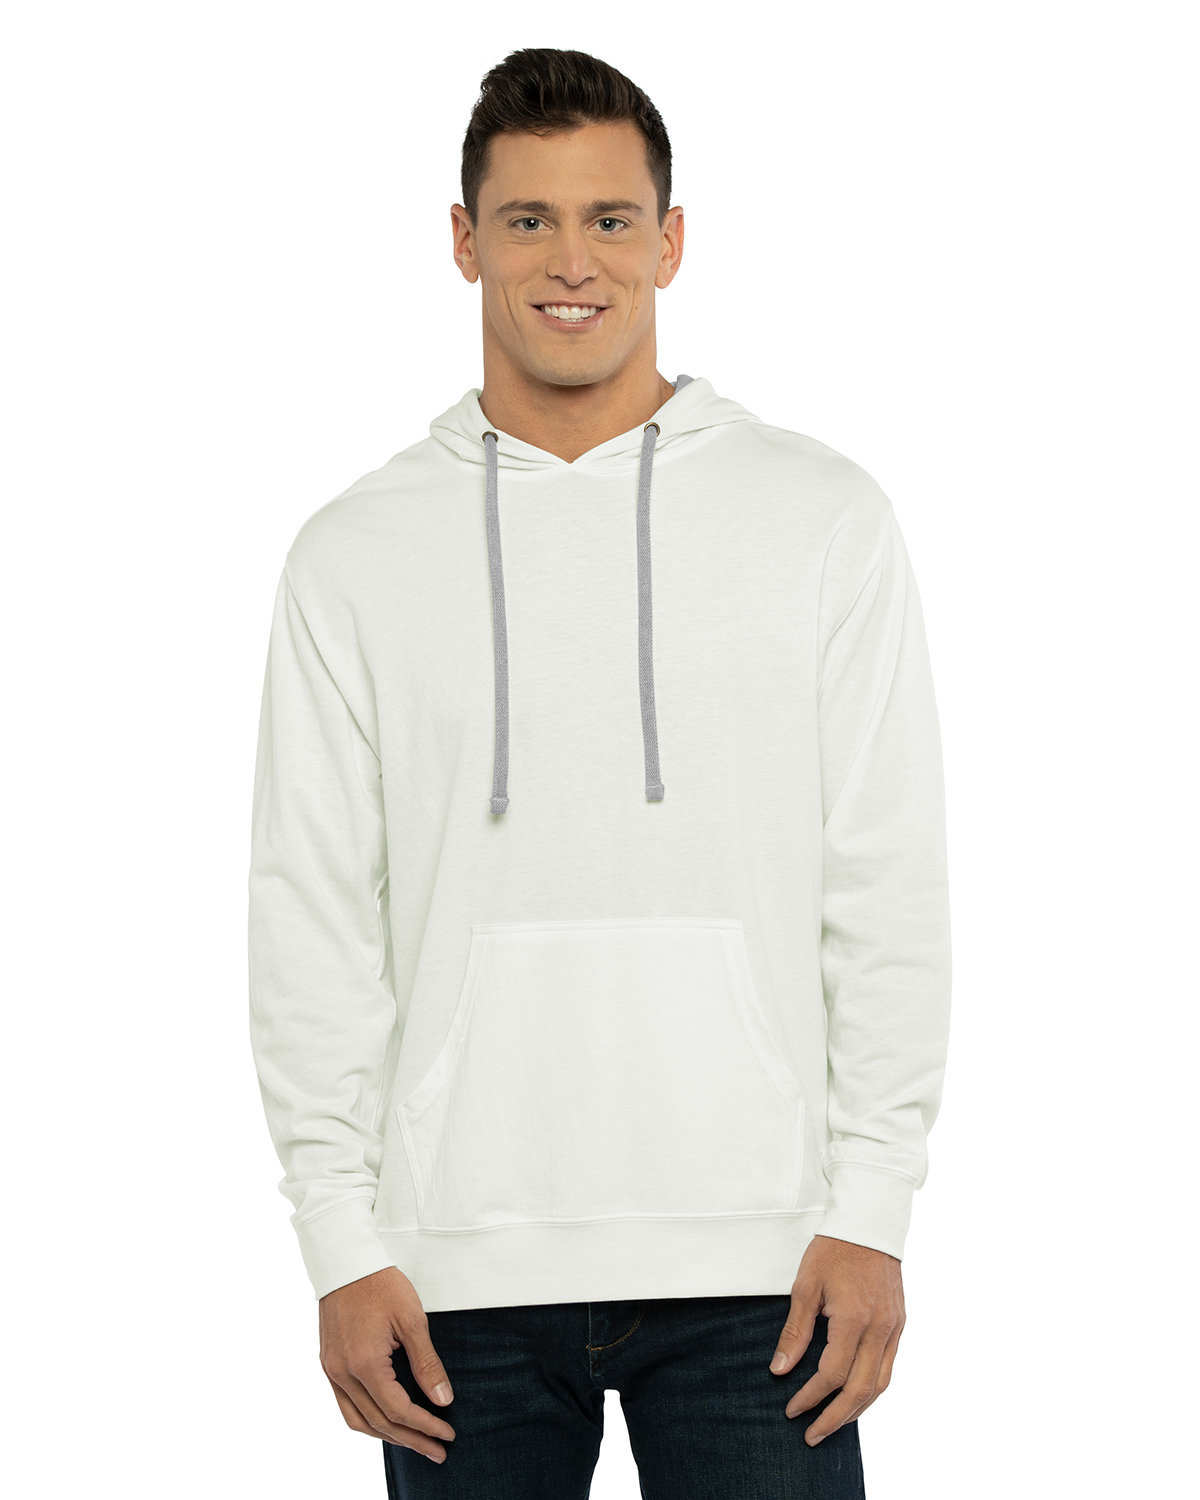 Unisex Laguna French Terry Pullover Hooded Sweatshirt-Next Level Apparel